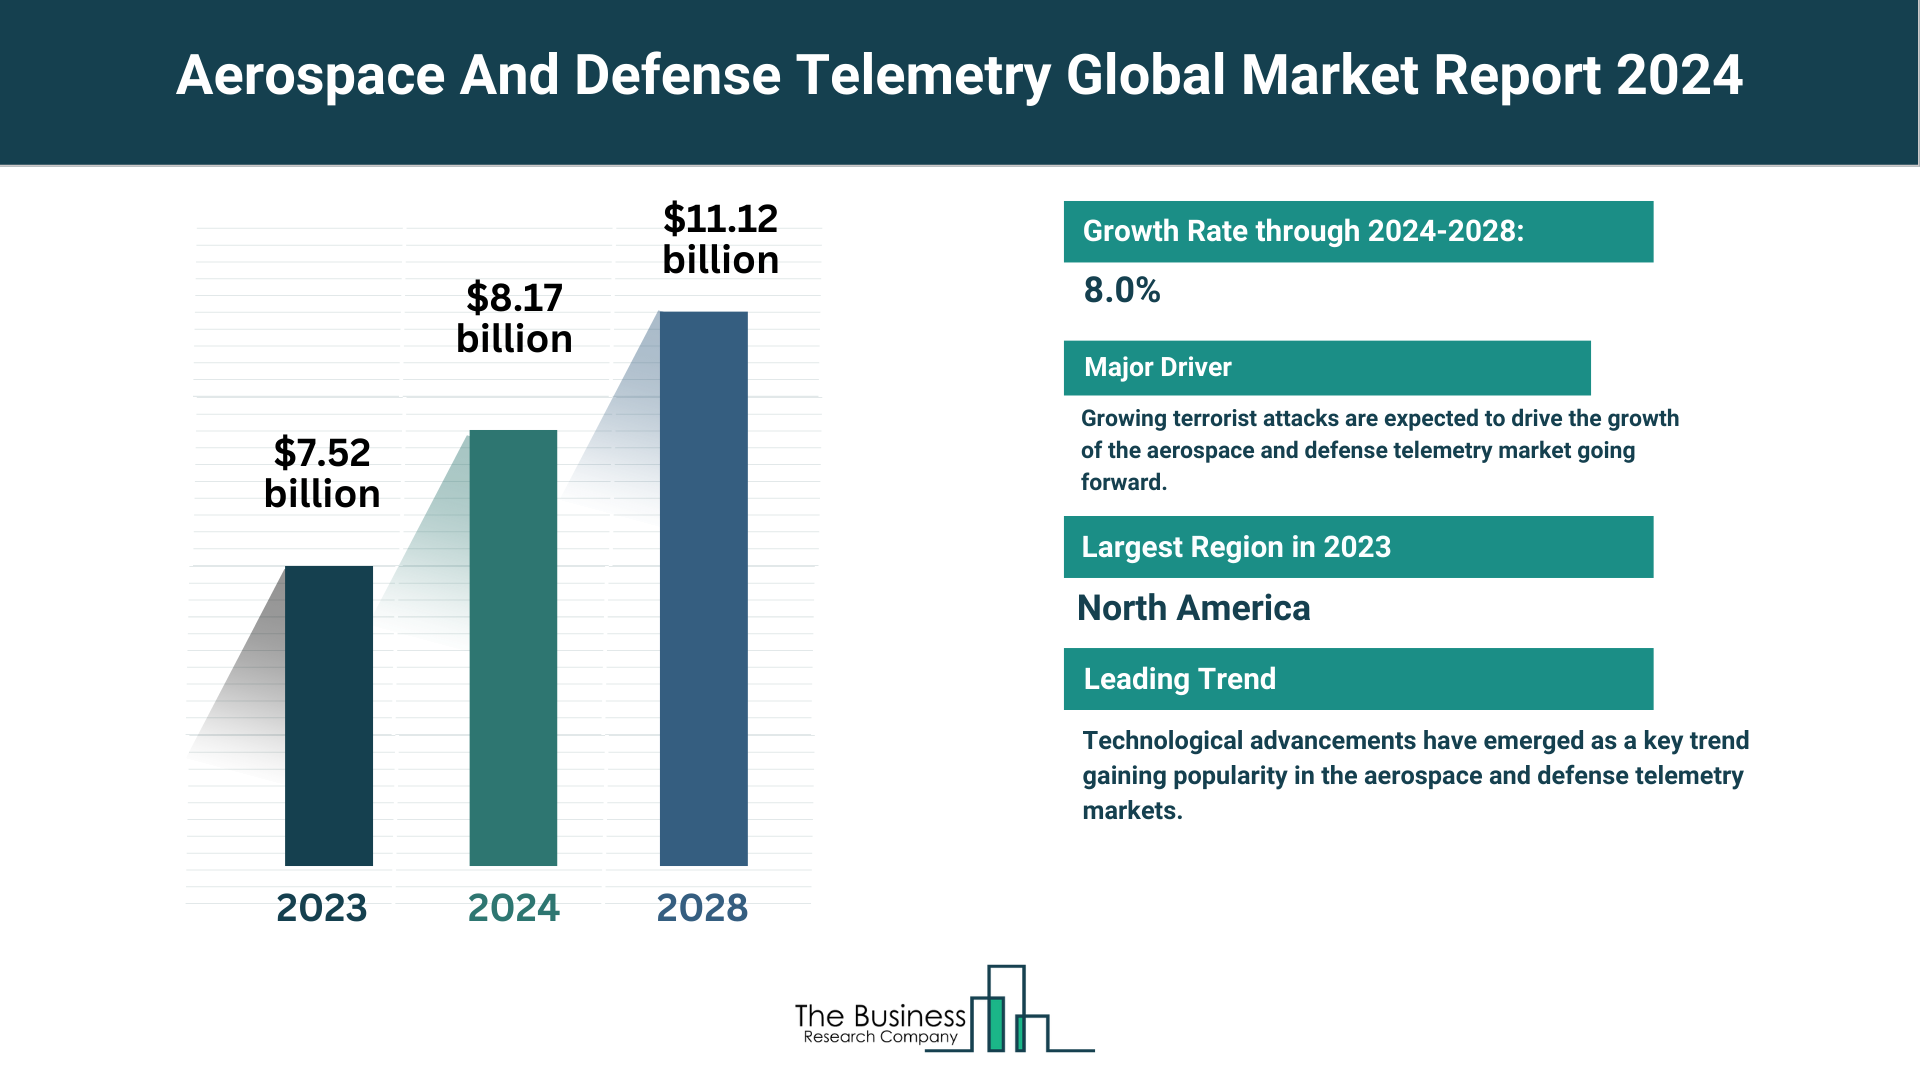 Global Aerospace And Defense Telemetry Market Analysis: Size, Drivers, Trends, Opportunities And Strategies